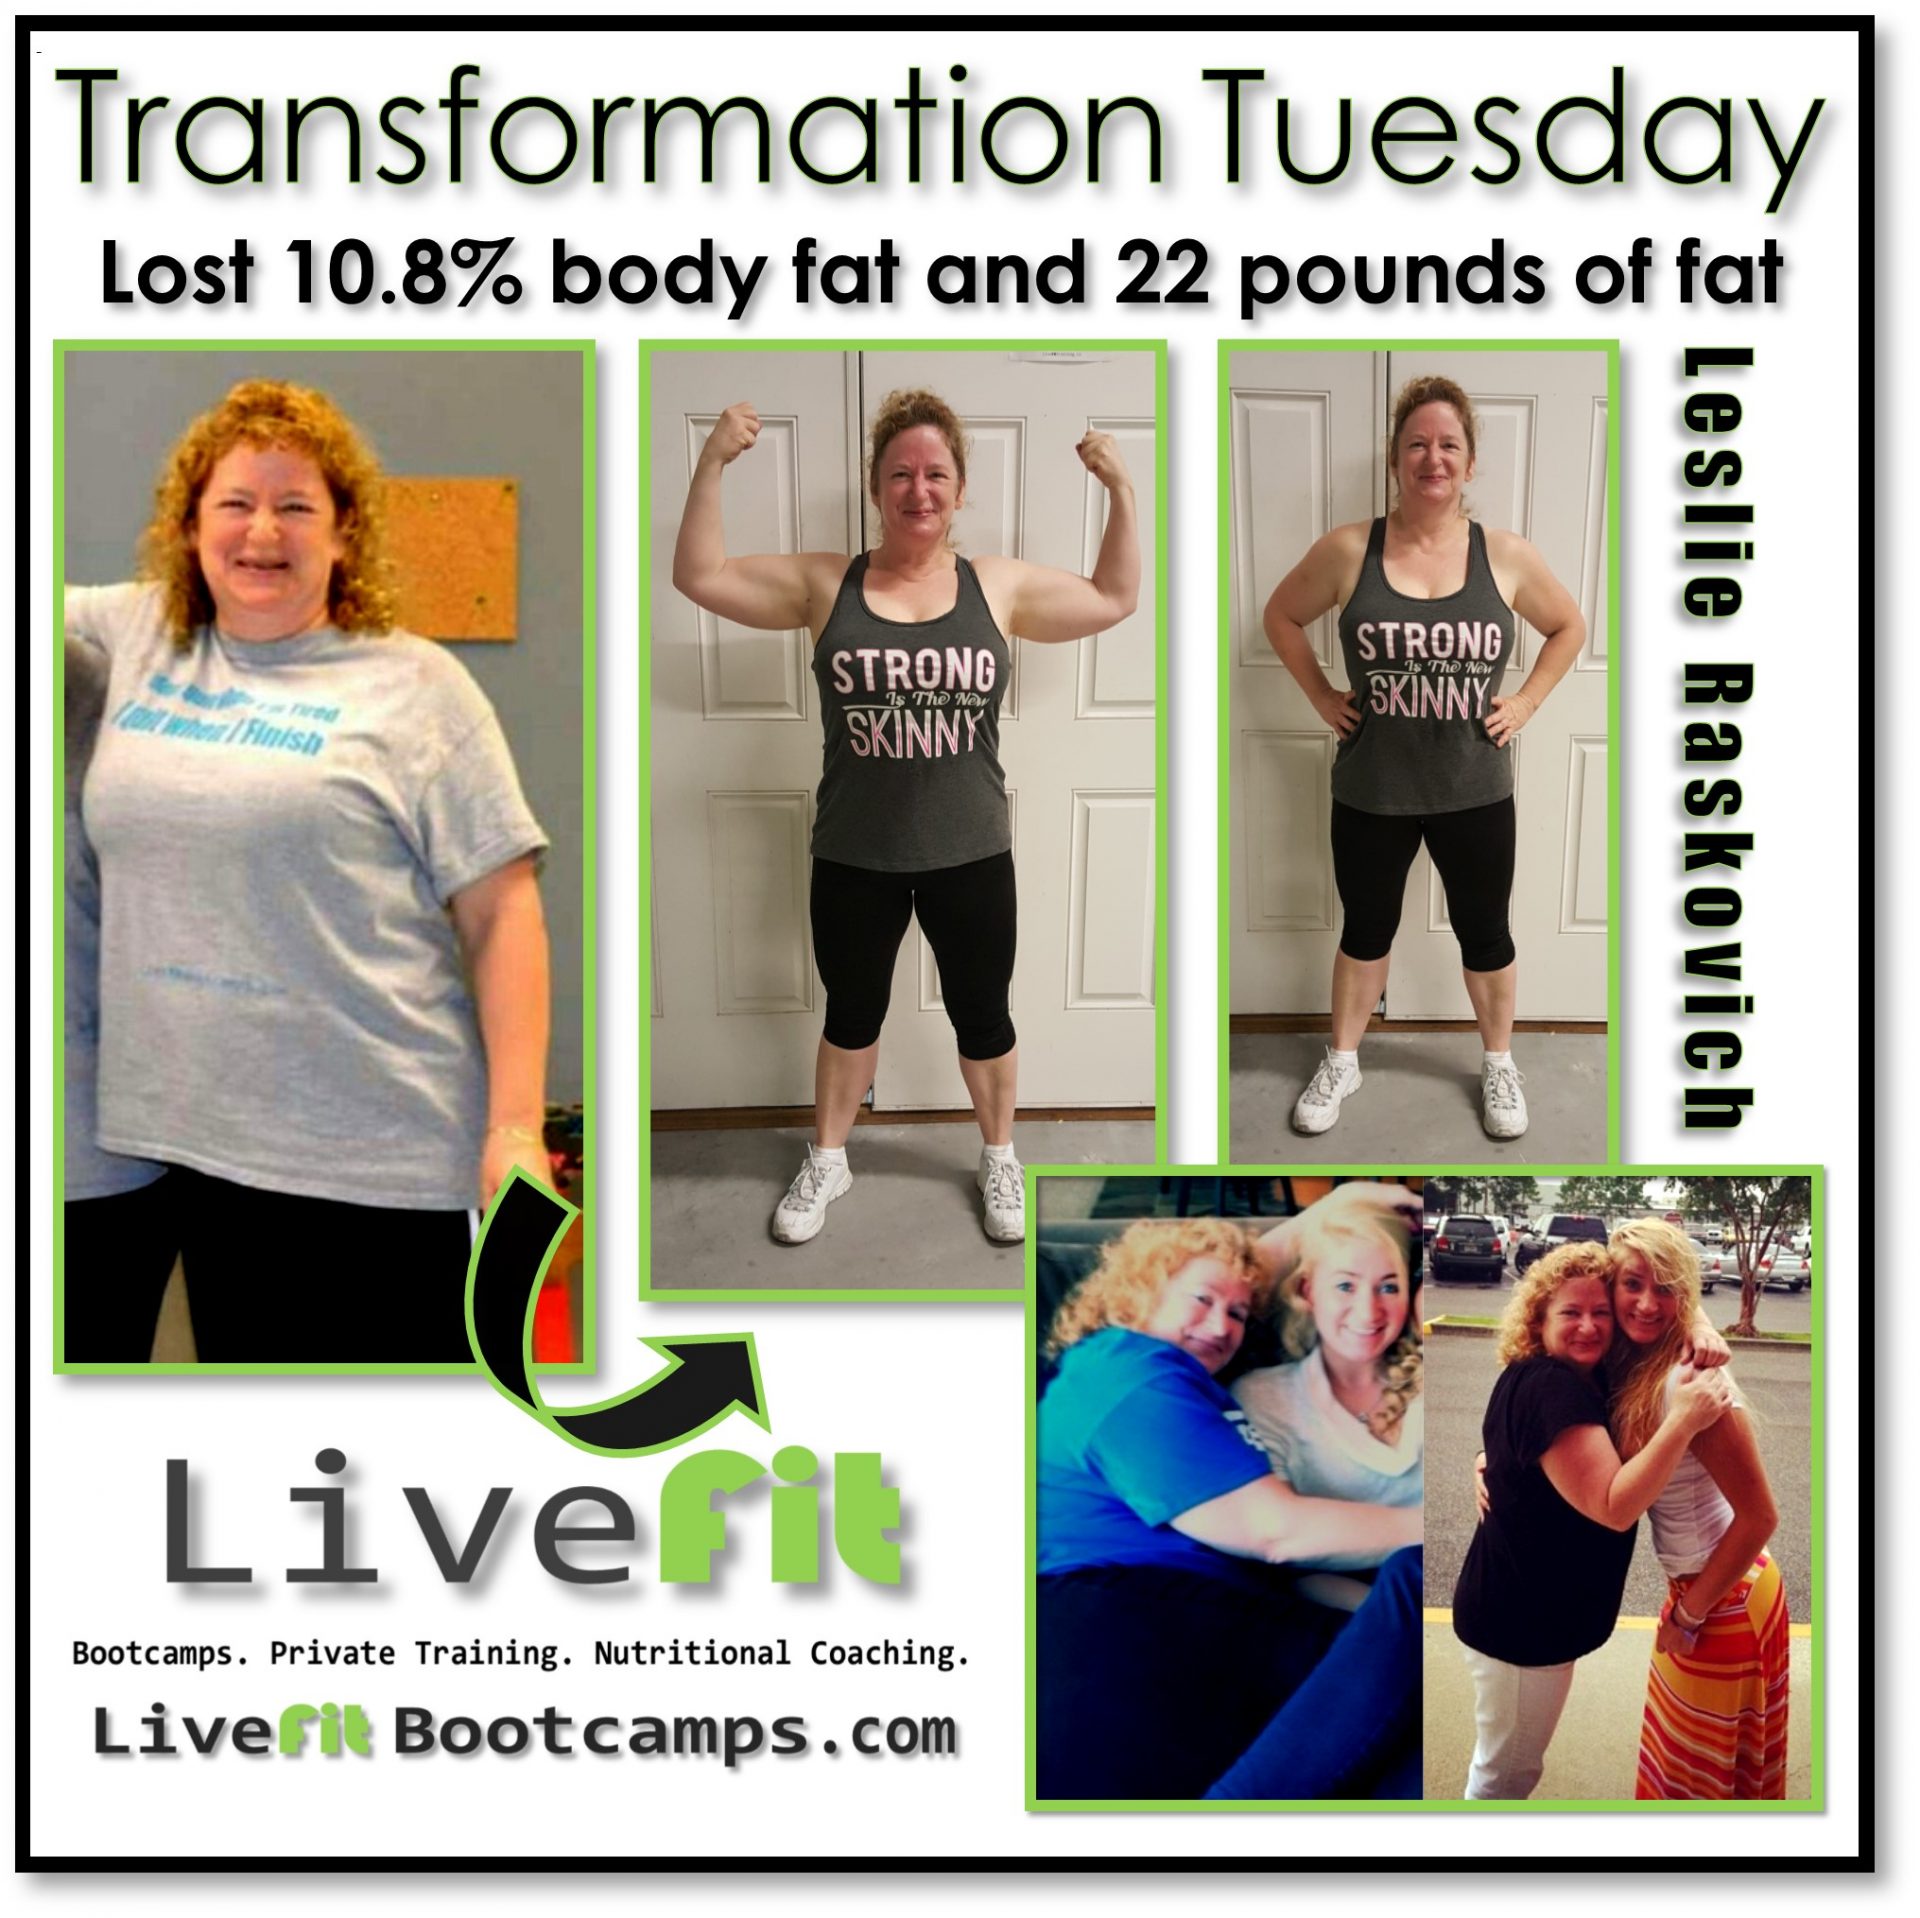 Just. Keep. Smiling. (Leslie’s Transformation Tuesday success story)